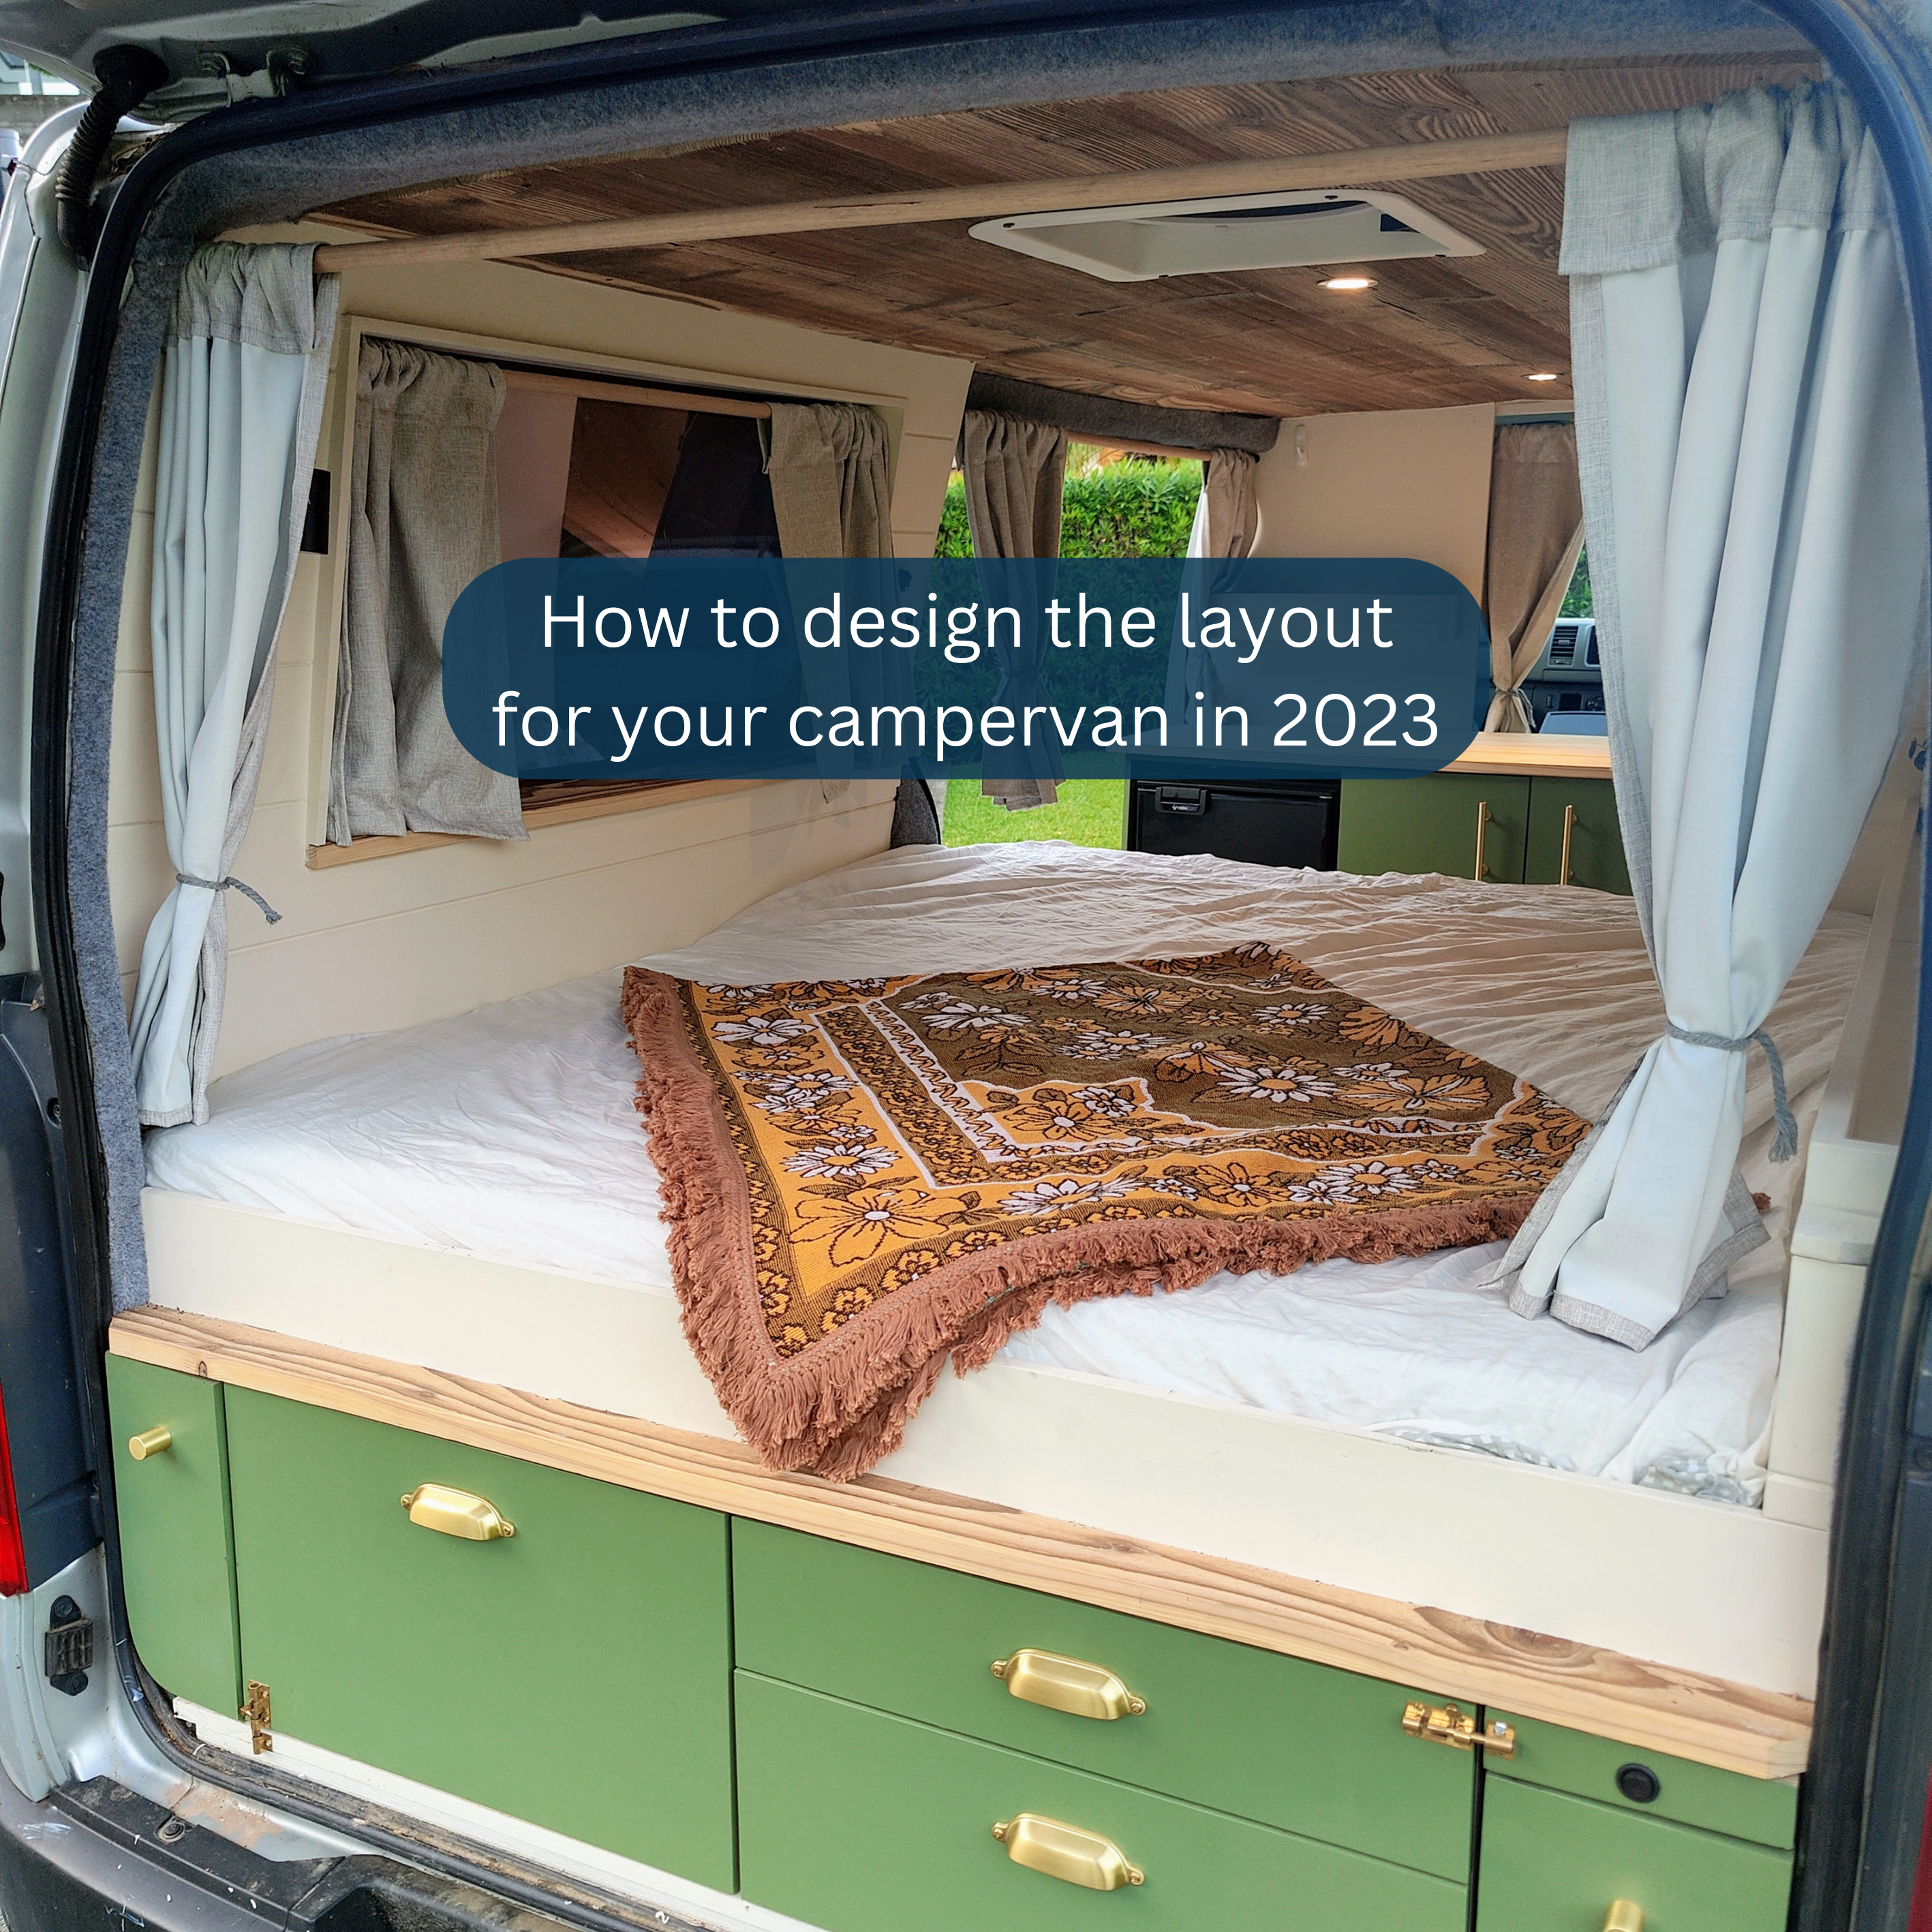 How to design the floorplan for your campervan in 2023